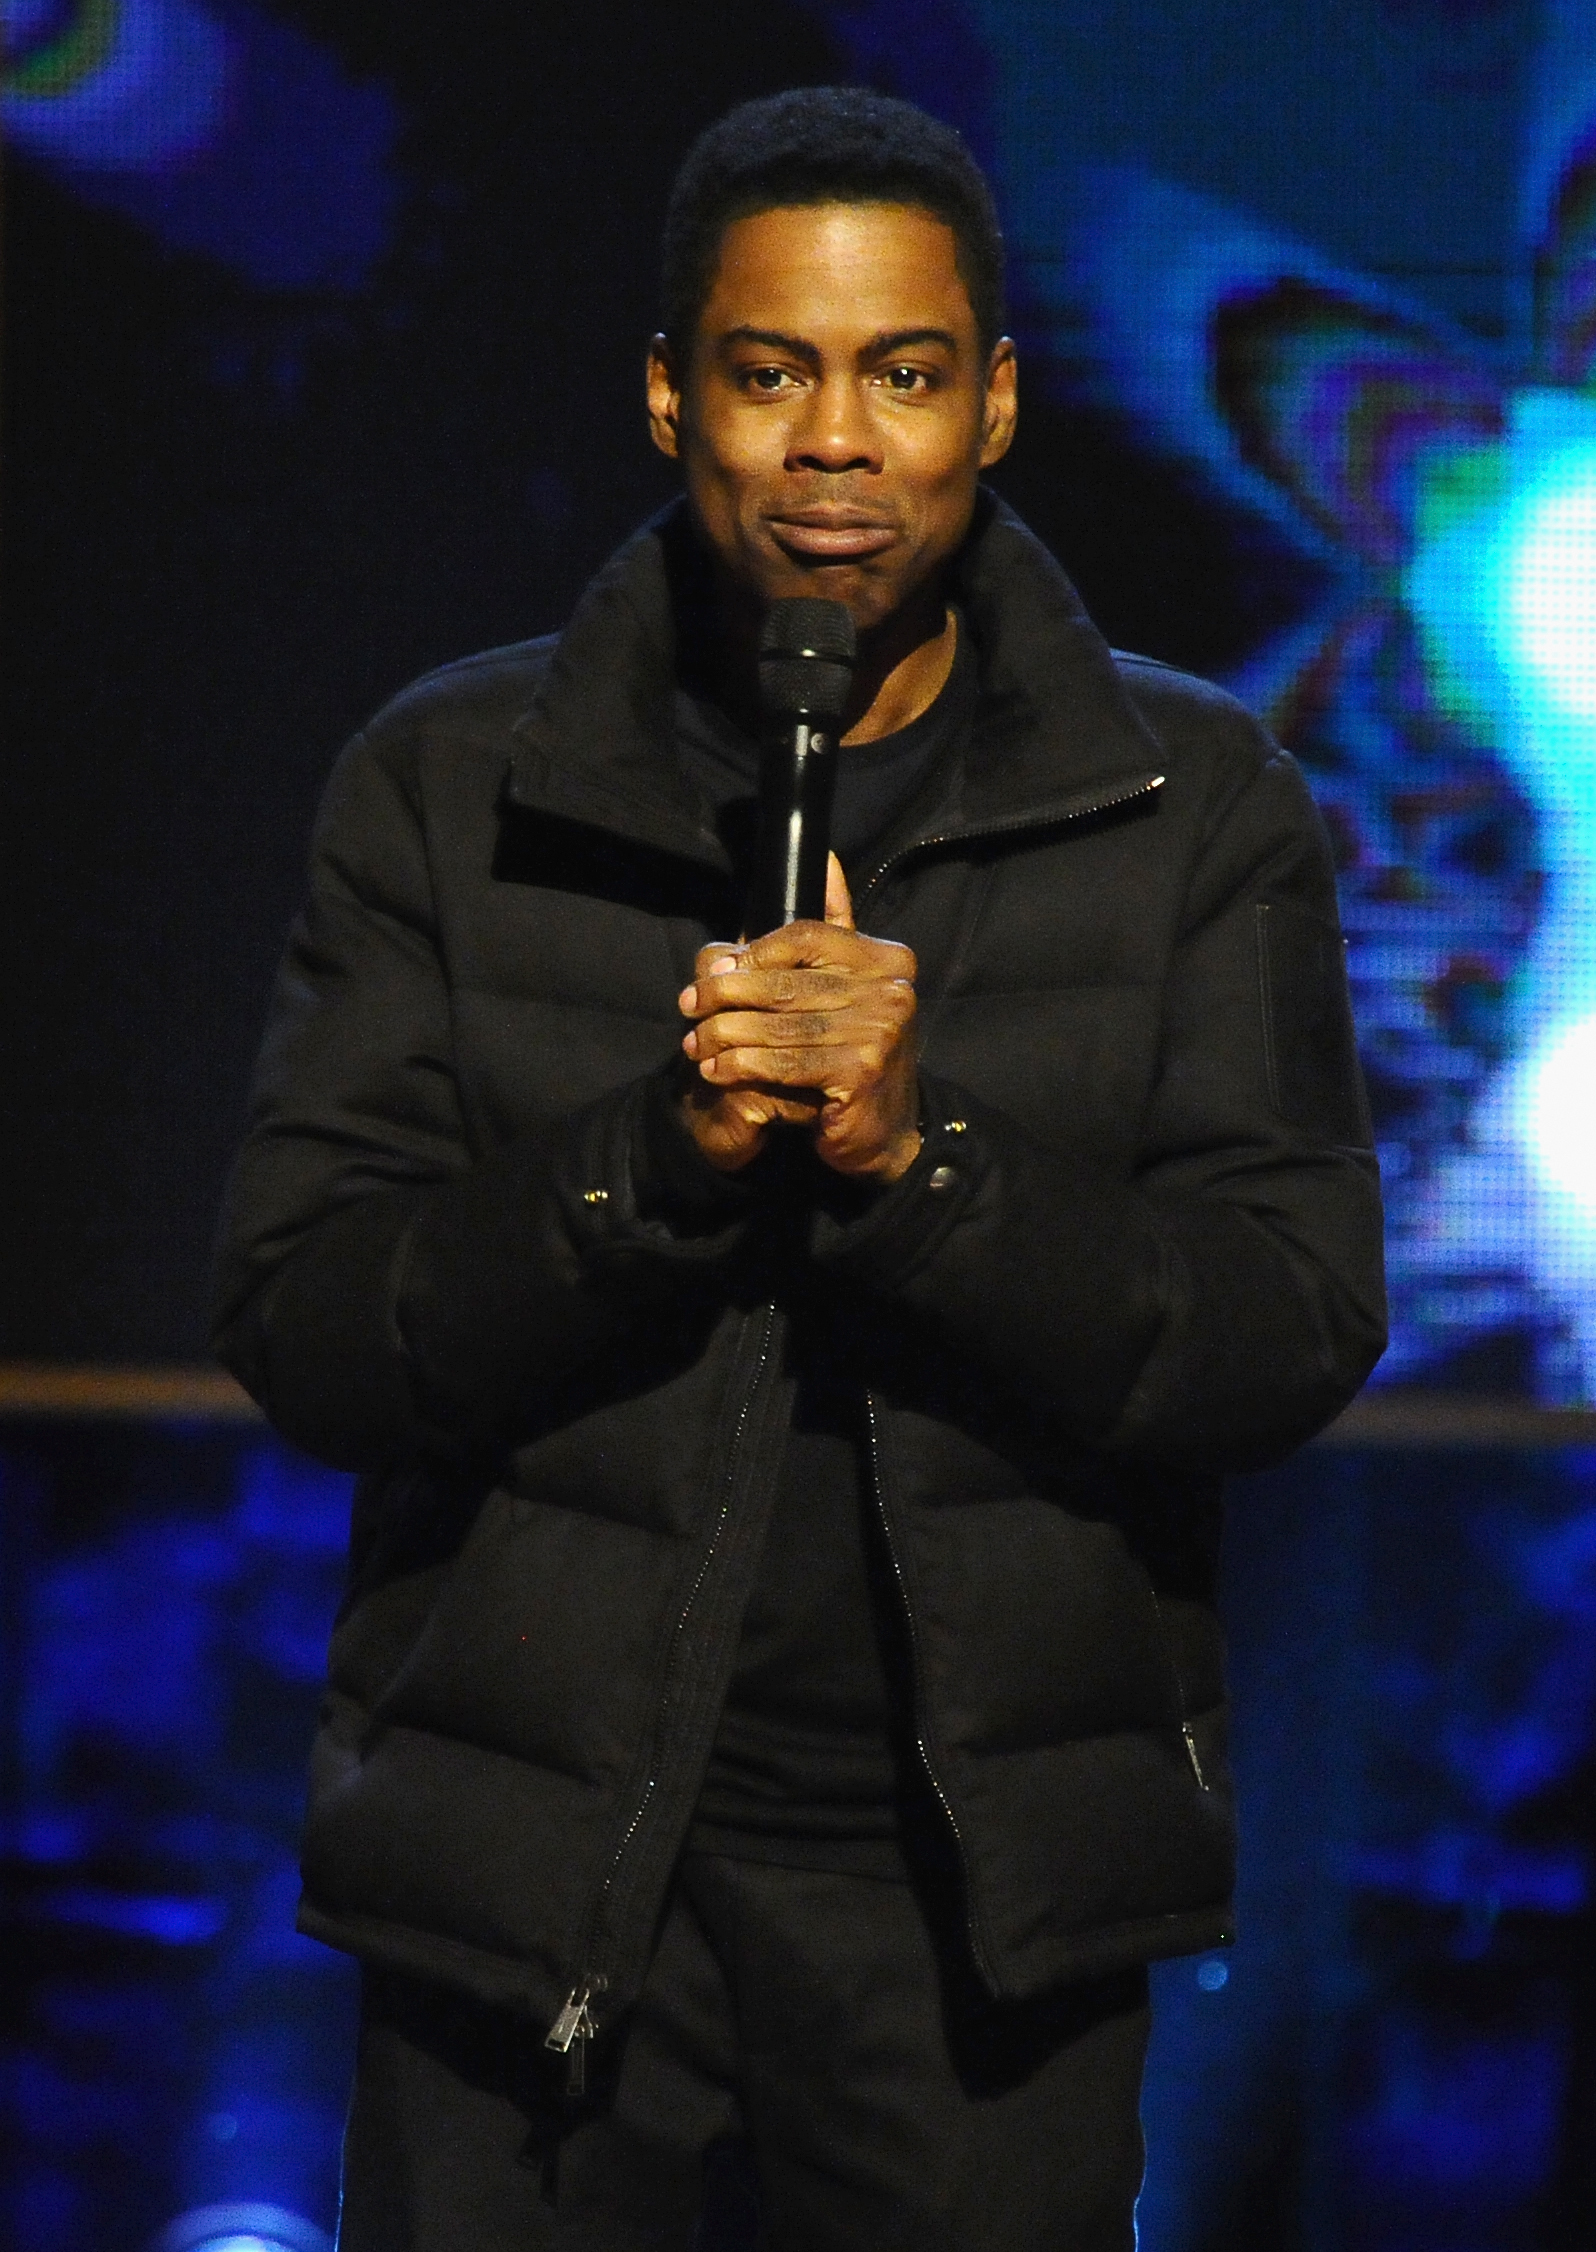 PHOTO: Chris Rock performs on stage in New York City, Feb. 28, 2015.